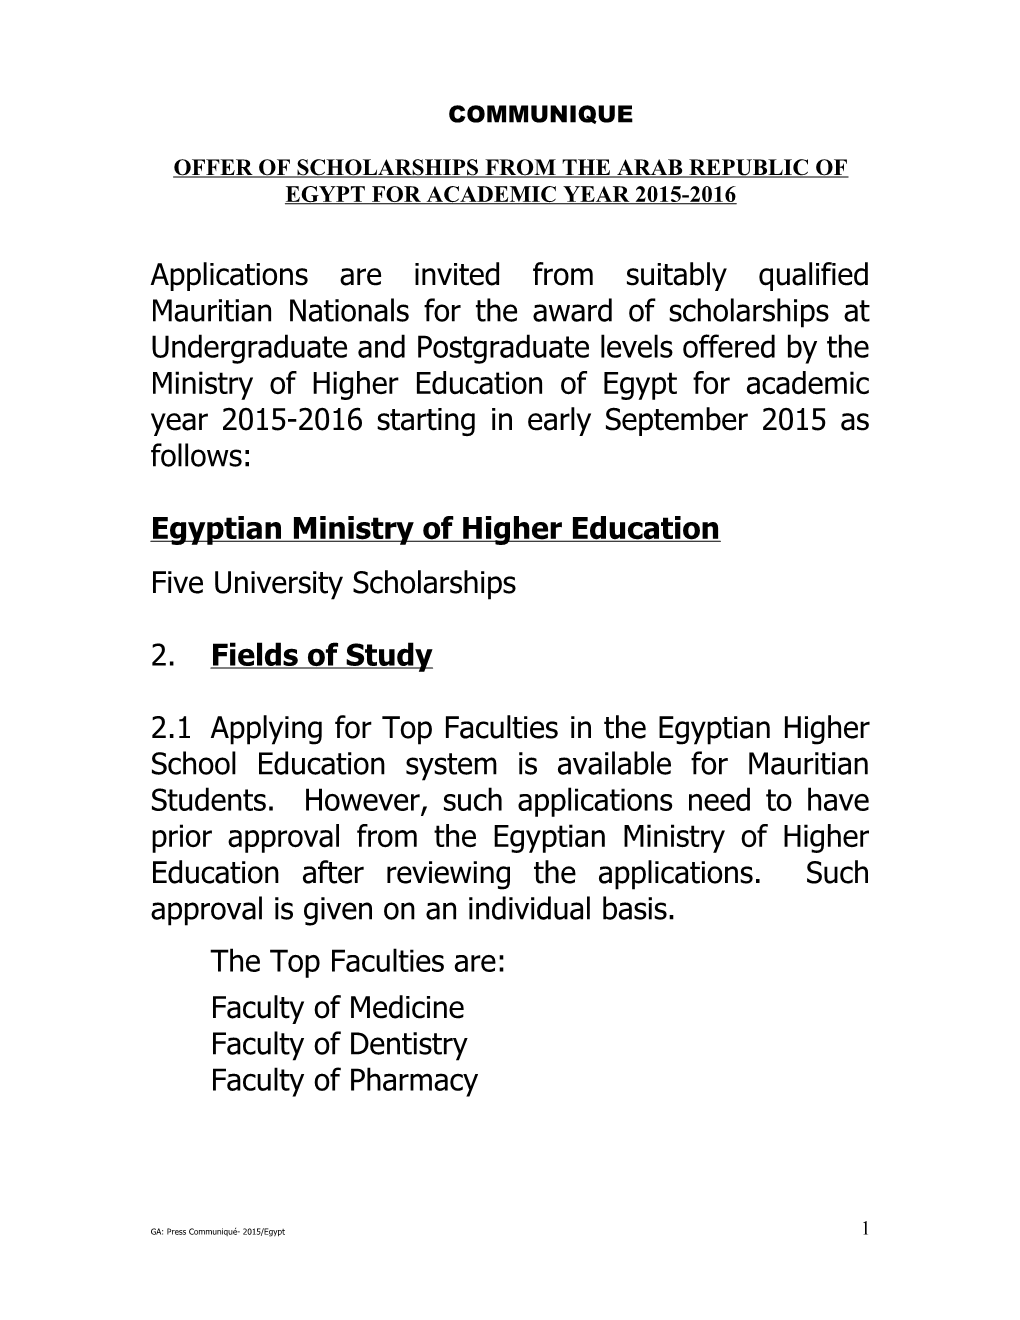 Offer of Scholarships from the Arab Republic of Egypt for Academic Year 2015-2016